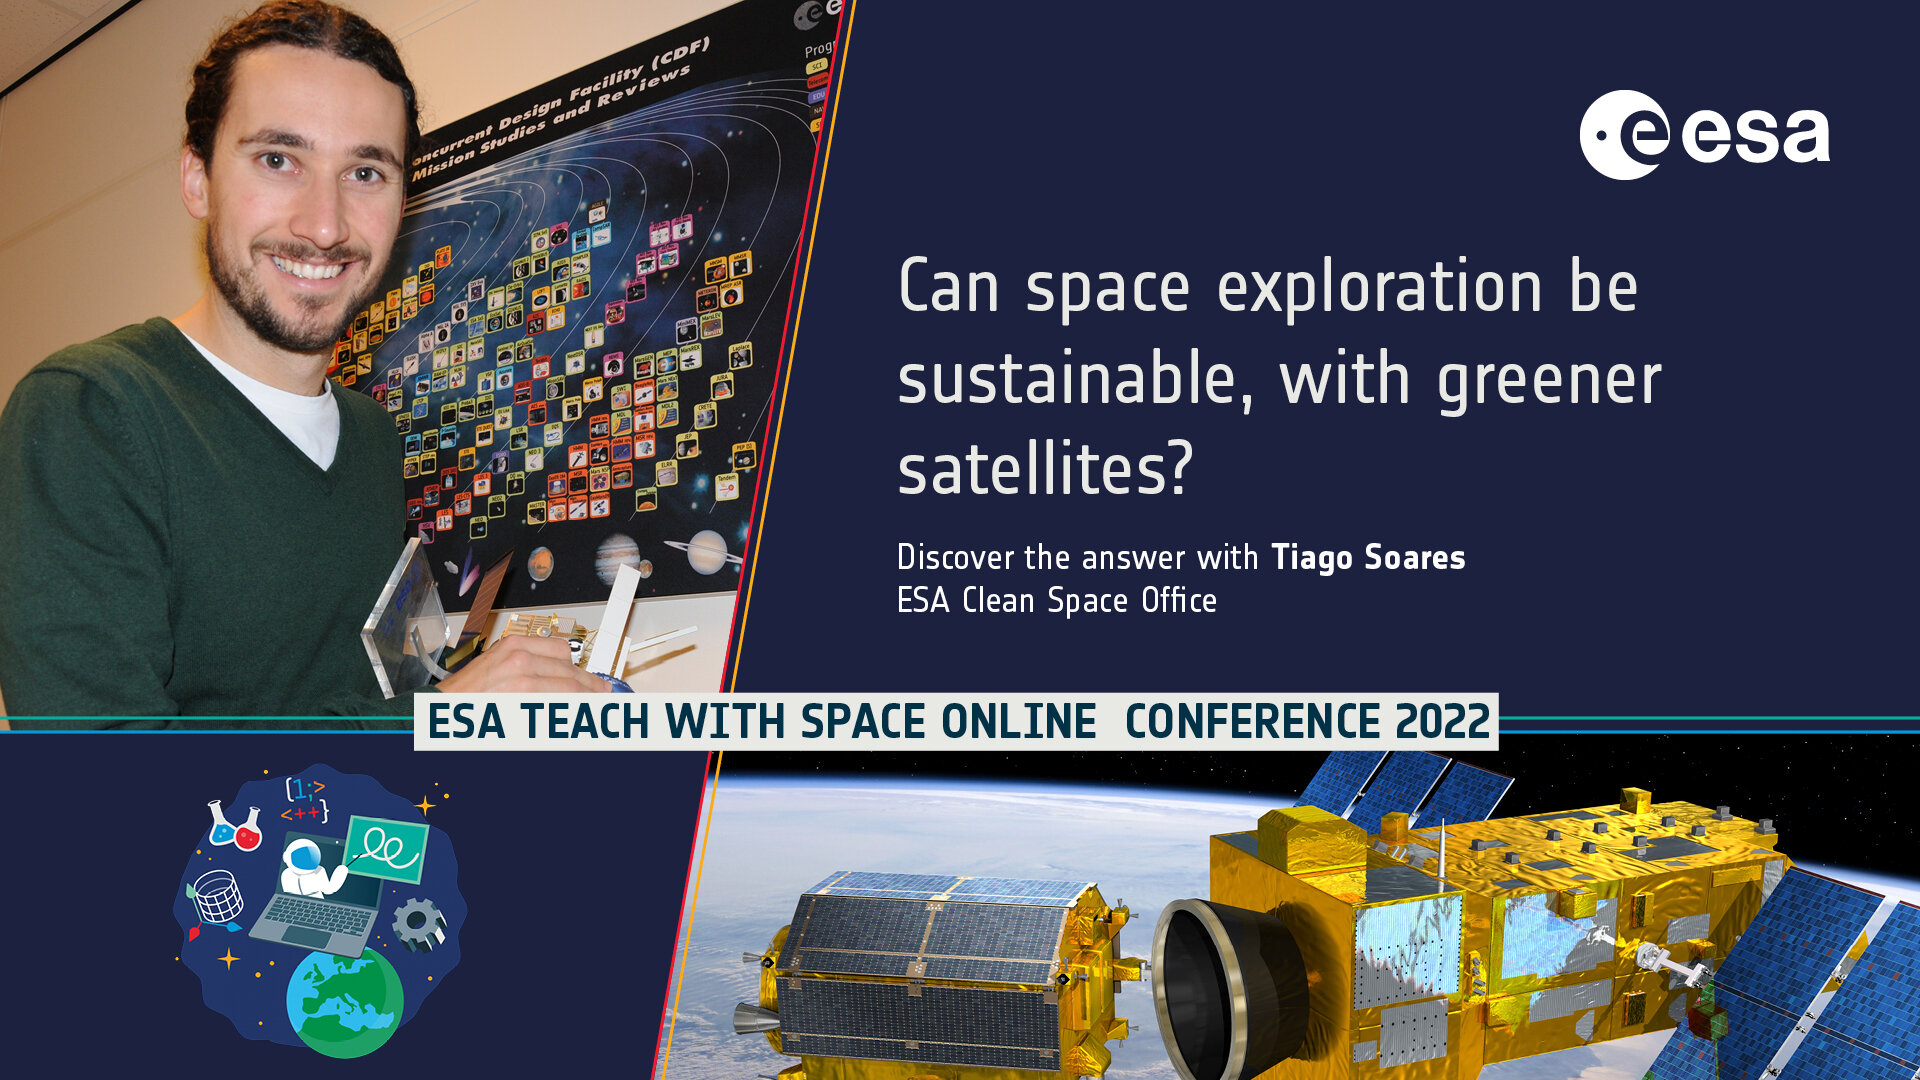 Tiago Soares is the key-note speaker for the "Keeping space clean" plenary during ESA 's Teach with Space Online Conference 2022